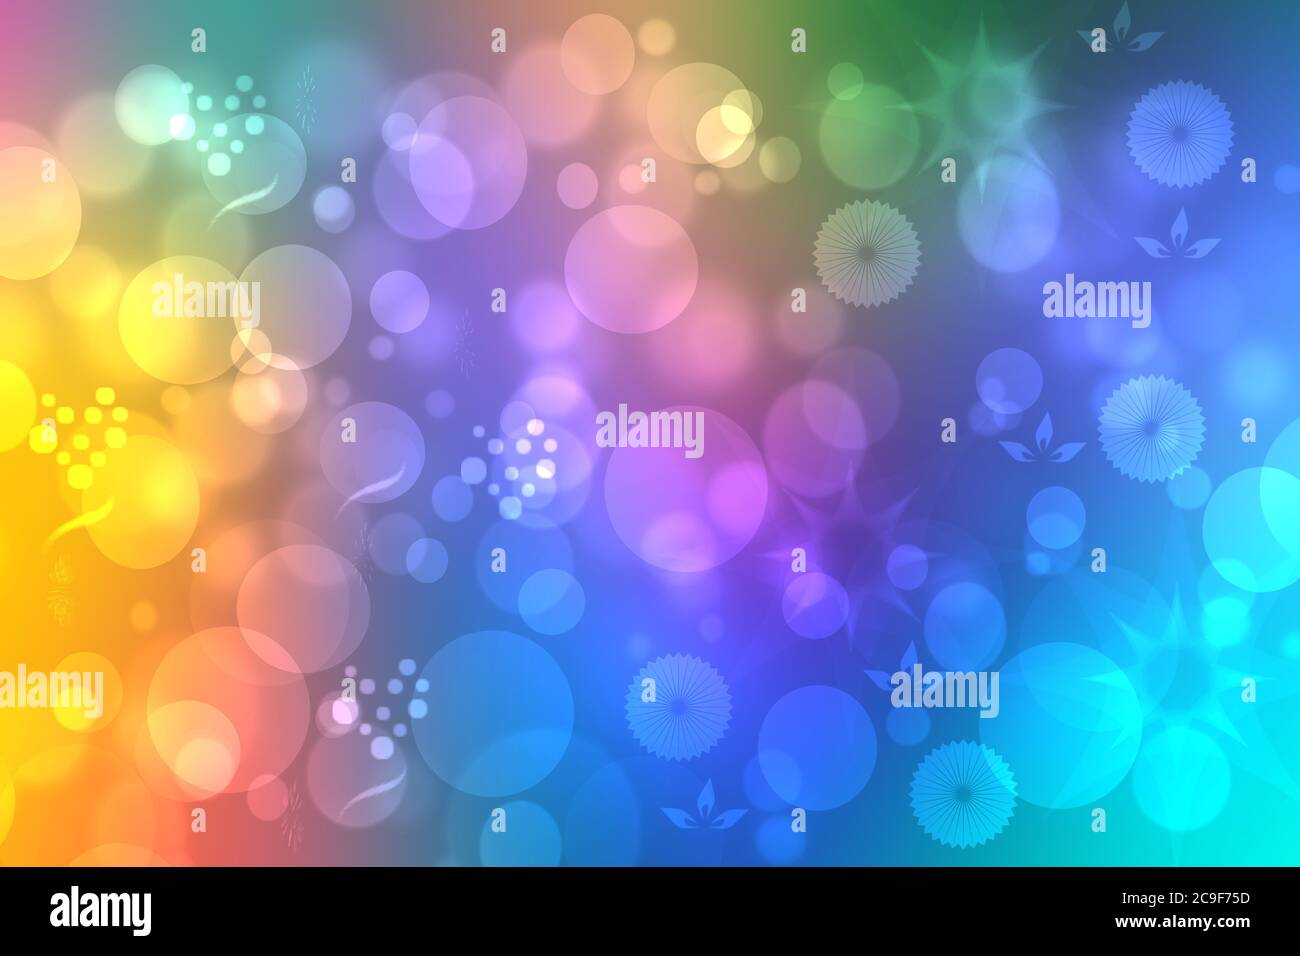 Rainbow Background Abstract Fresh Delicate Pastel Vivid Colorful Fantasy Rainbow Background Summer Texture With Defocused Bokeh Lights Beautiful Lig Stock Photo Alamy